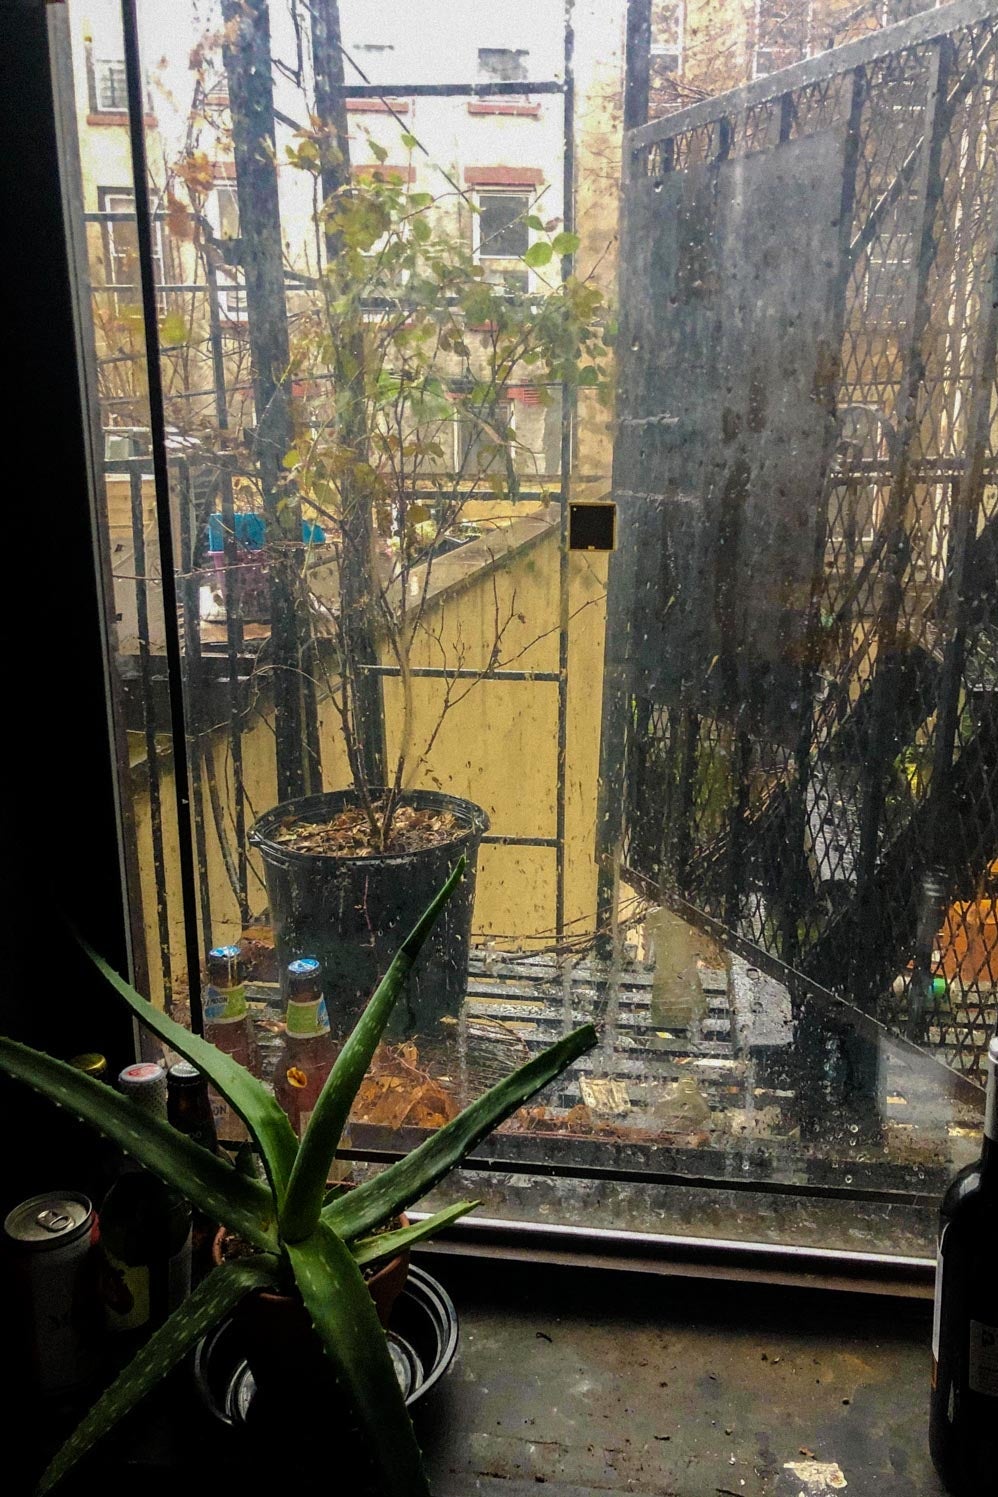 A window to a fire escape facing an ochre courtyard on a rainy day.